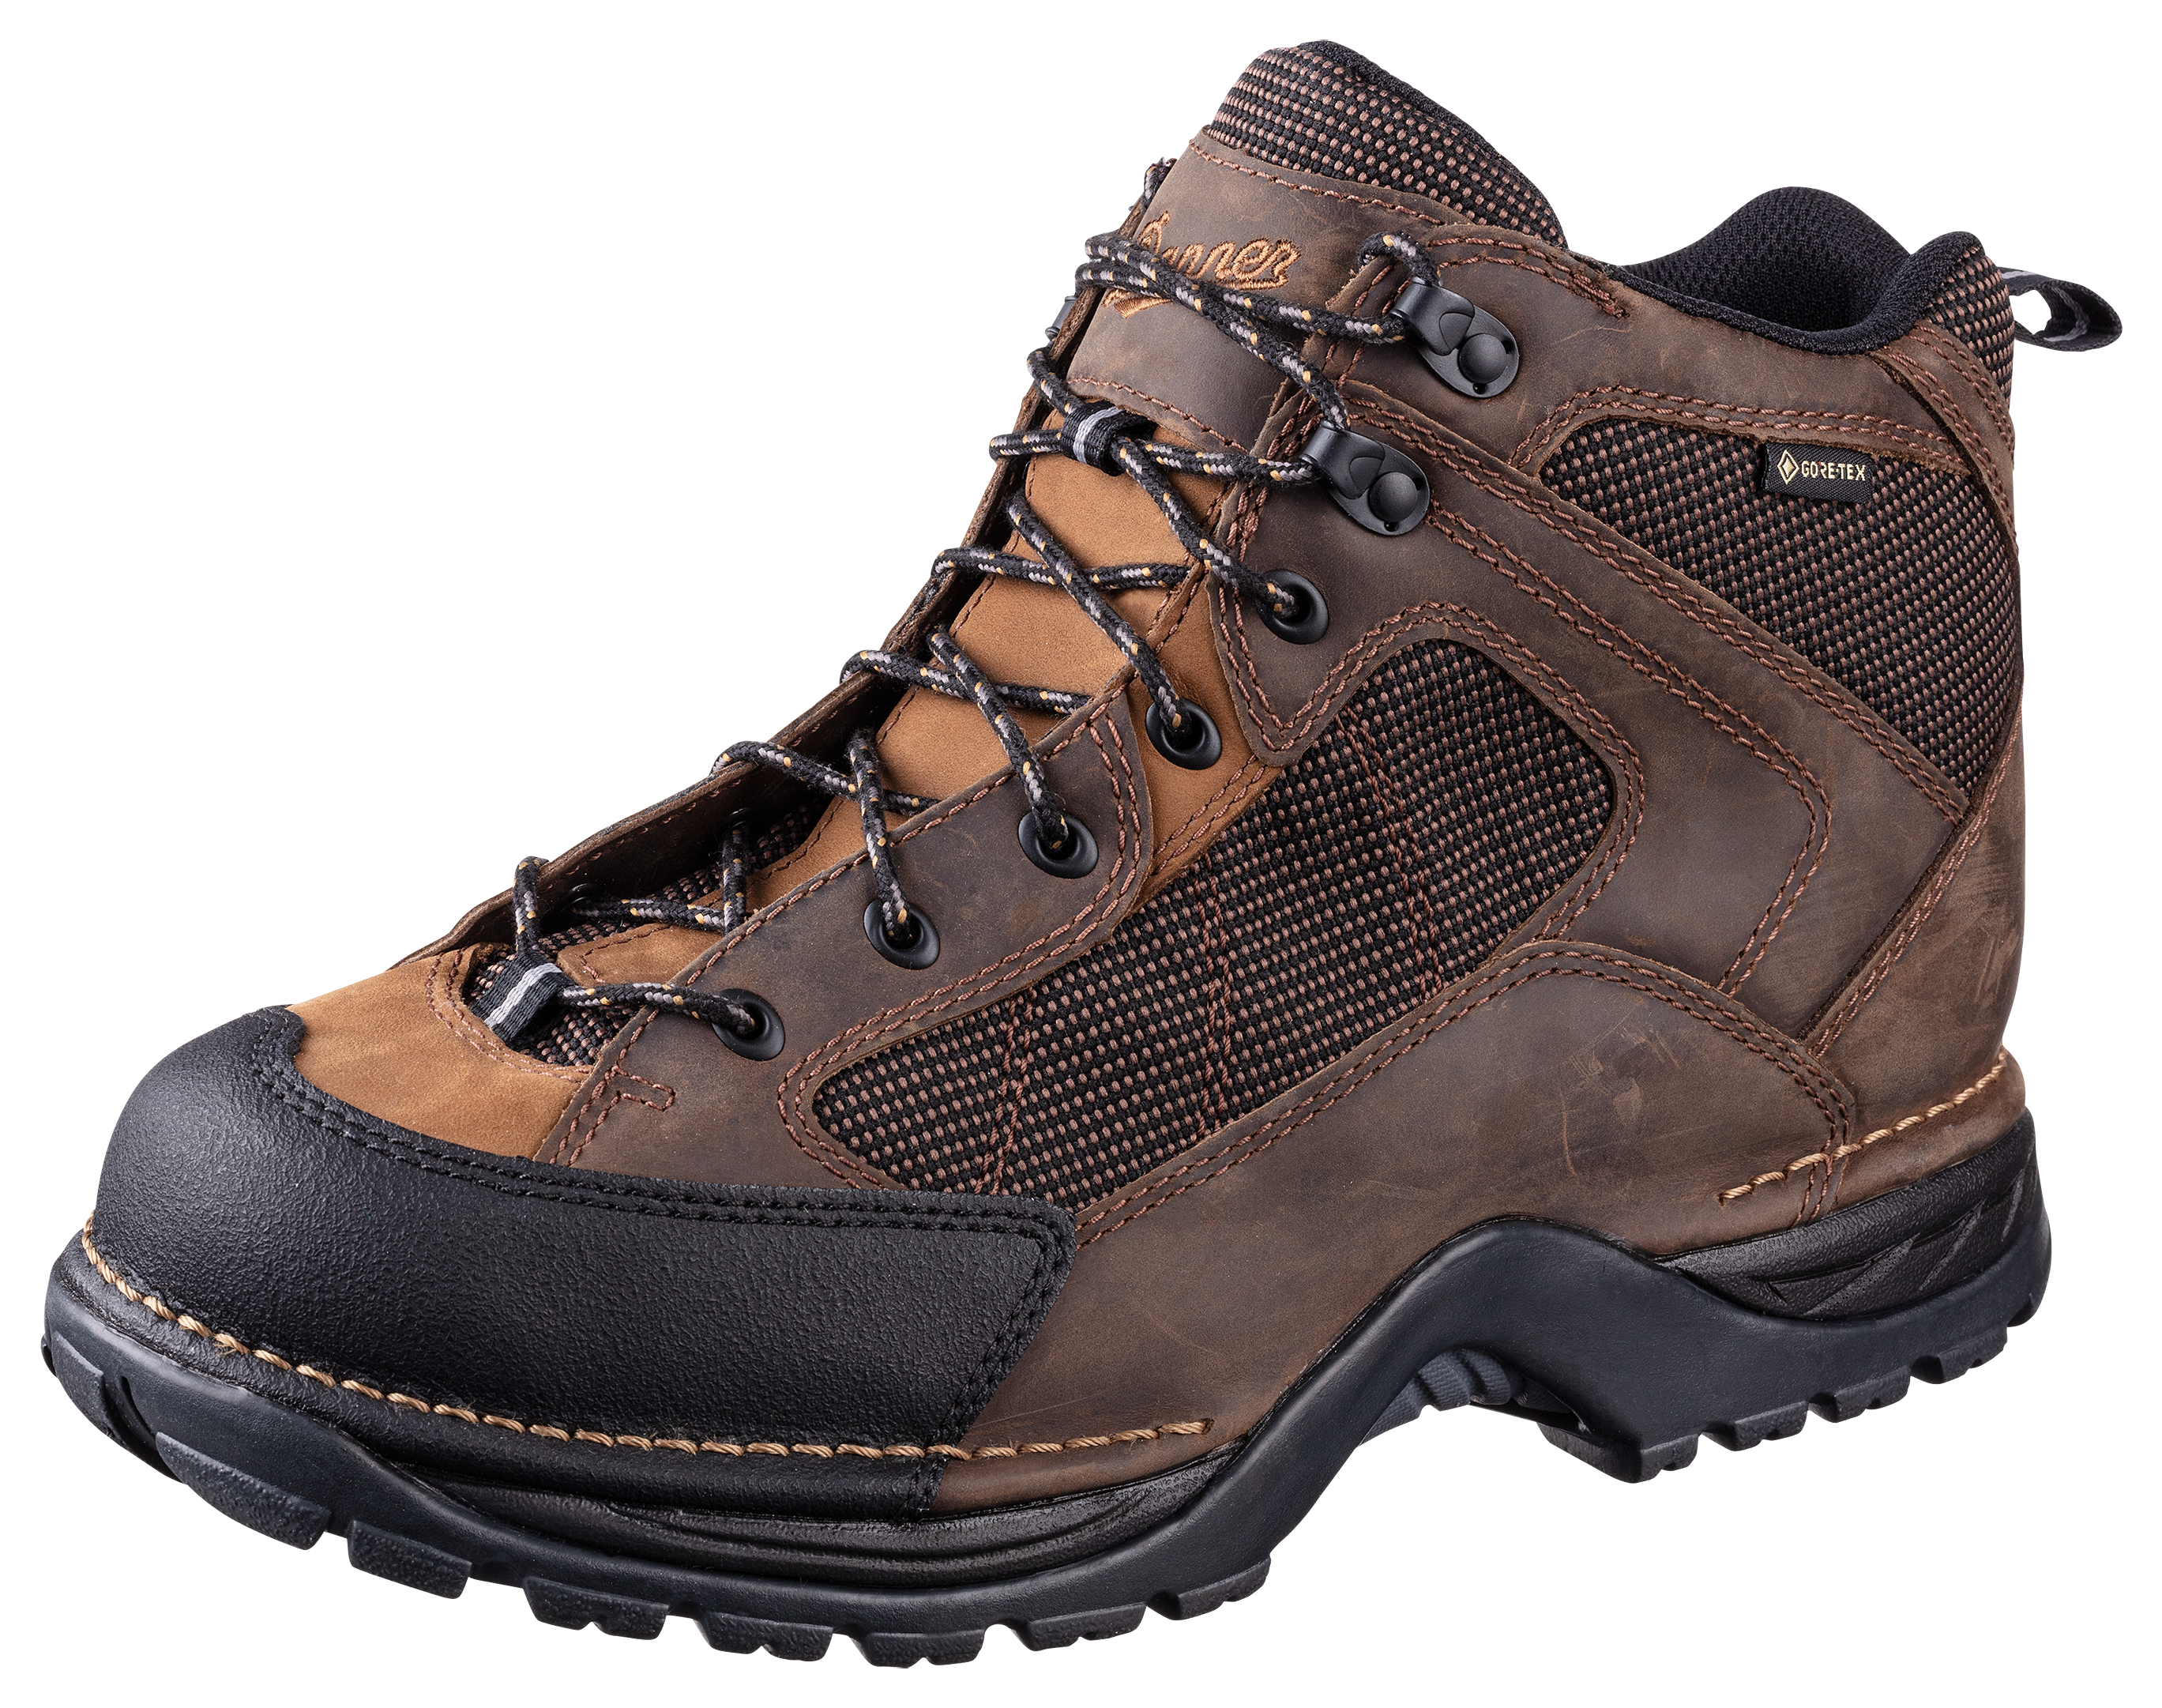 Danner Radical 452 GORE-TEX Hiking Boots for Men